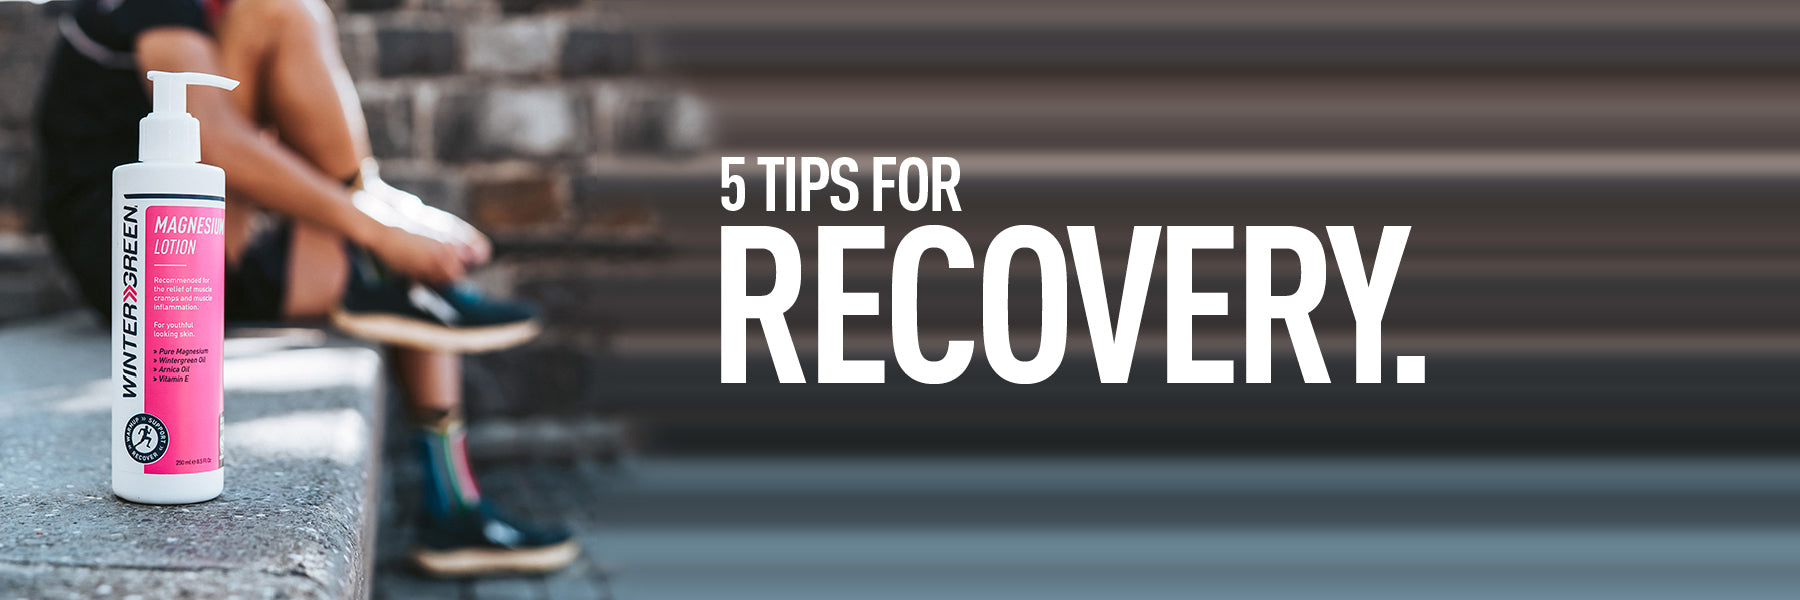 5 TIPS FOR RECOVERY